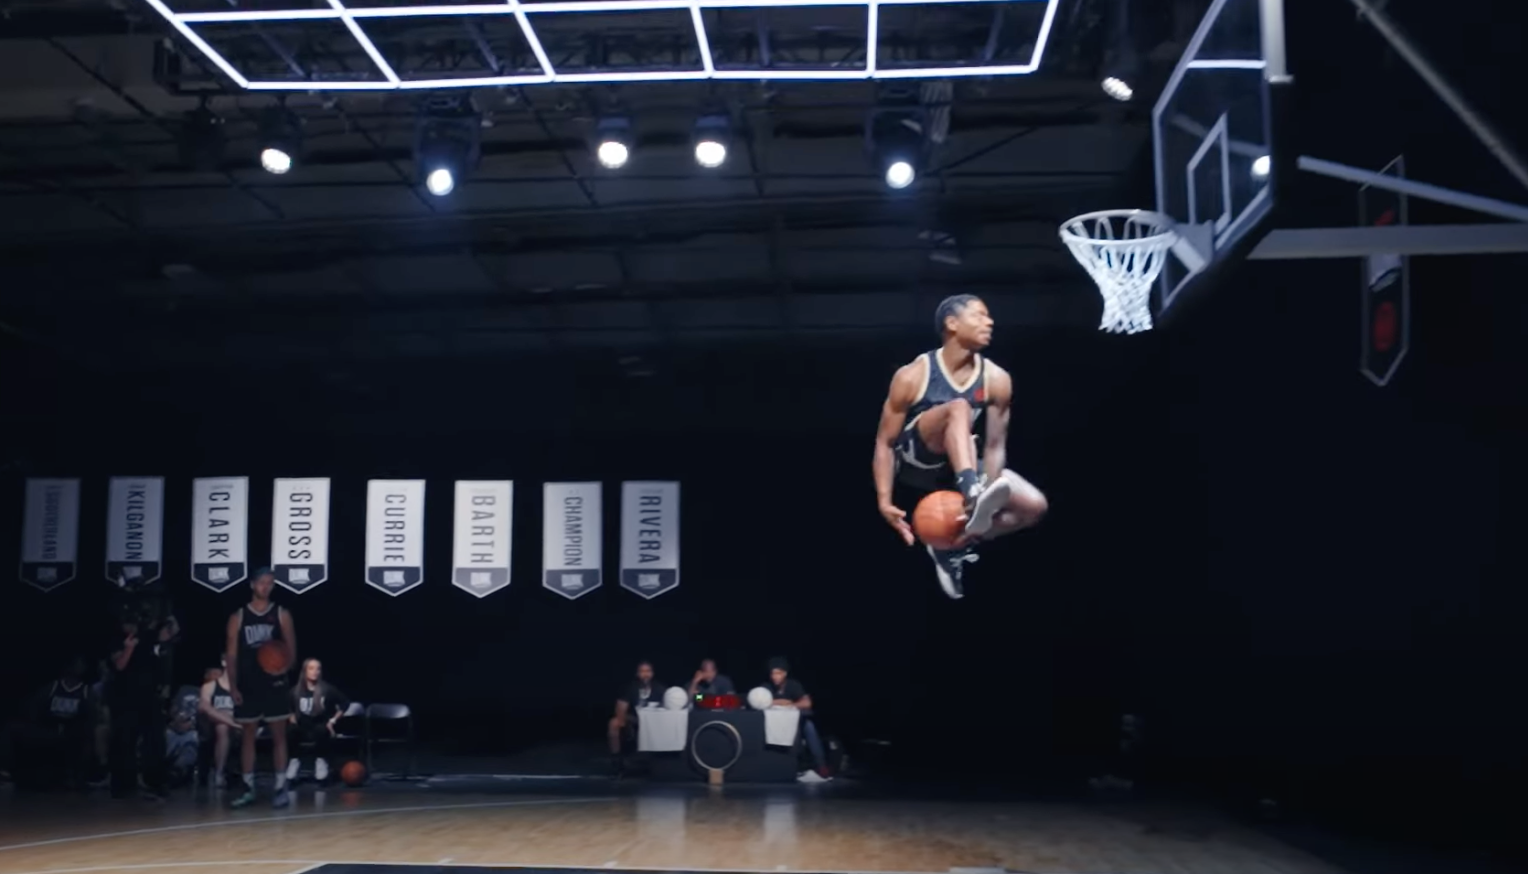 3 Of The World's Best Dunkers Go Off In A Game Of Slam Dunk HORSE